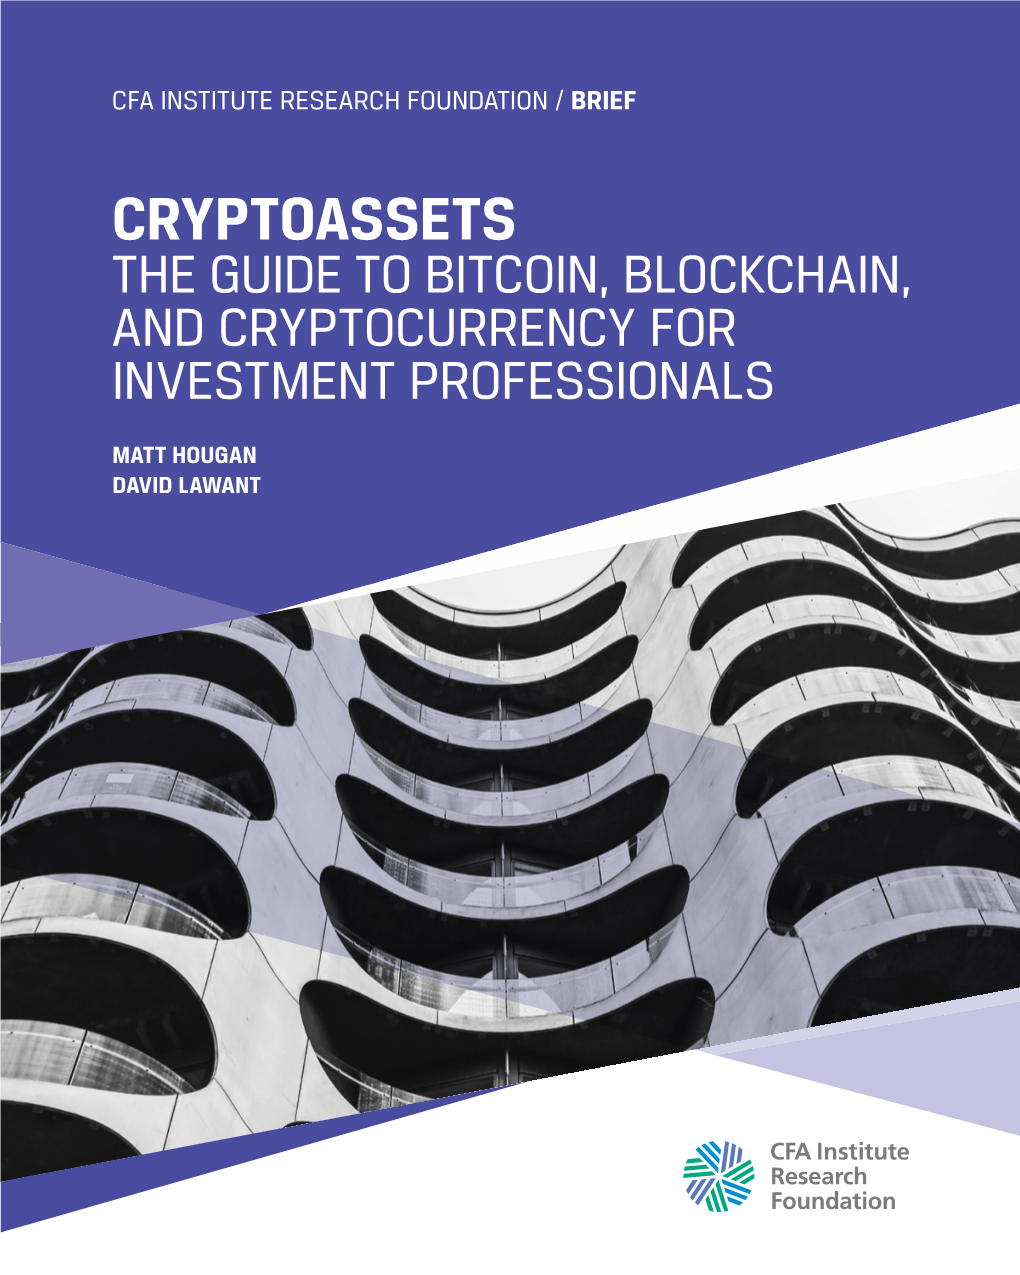 Cryptoassets the Guide to Bitcoin, Blockchain, and Cryptocurrency for Investment Professionals